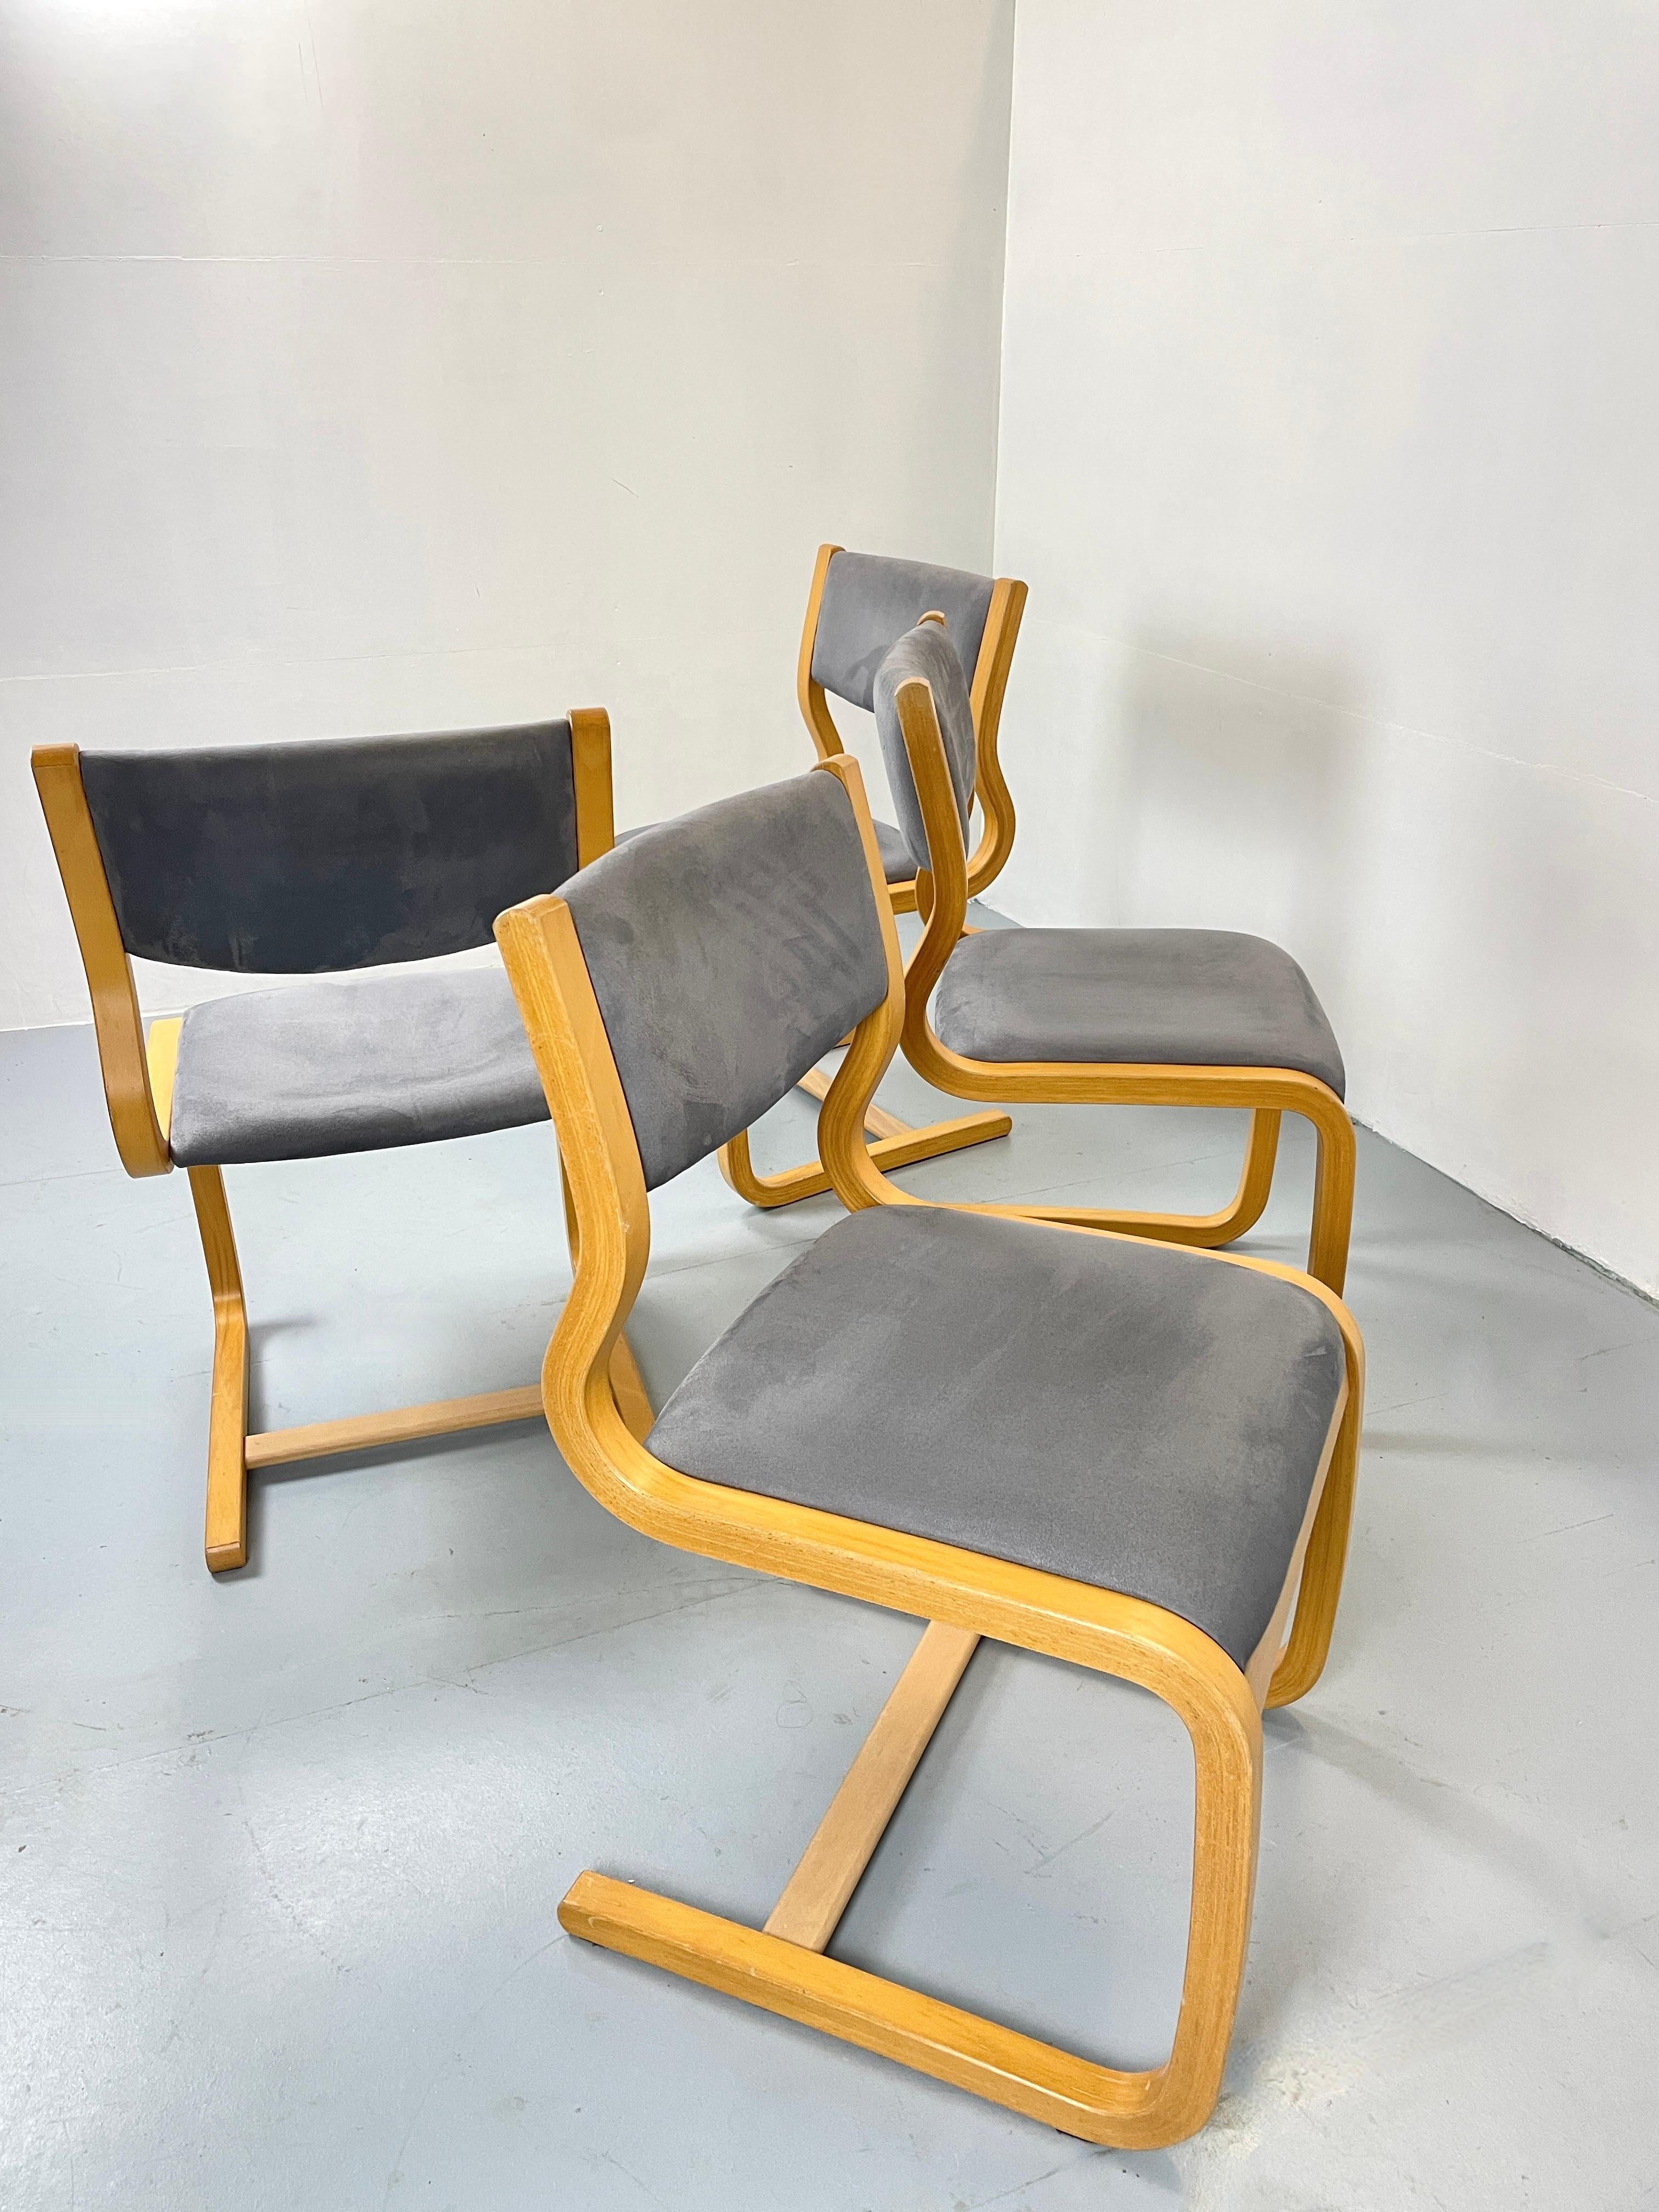 Nice vintage scanidavian cantilever chairs.
Probably made in Denmark. Curved laminated beechwood design.
grey upholstery. 

It is a set of four chairs.